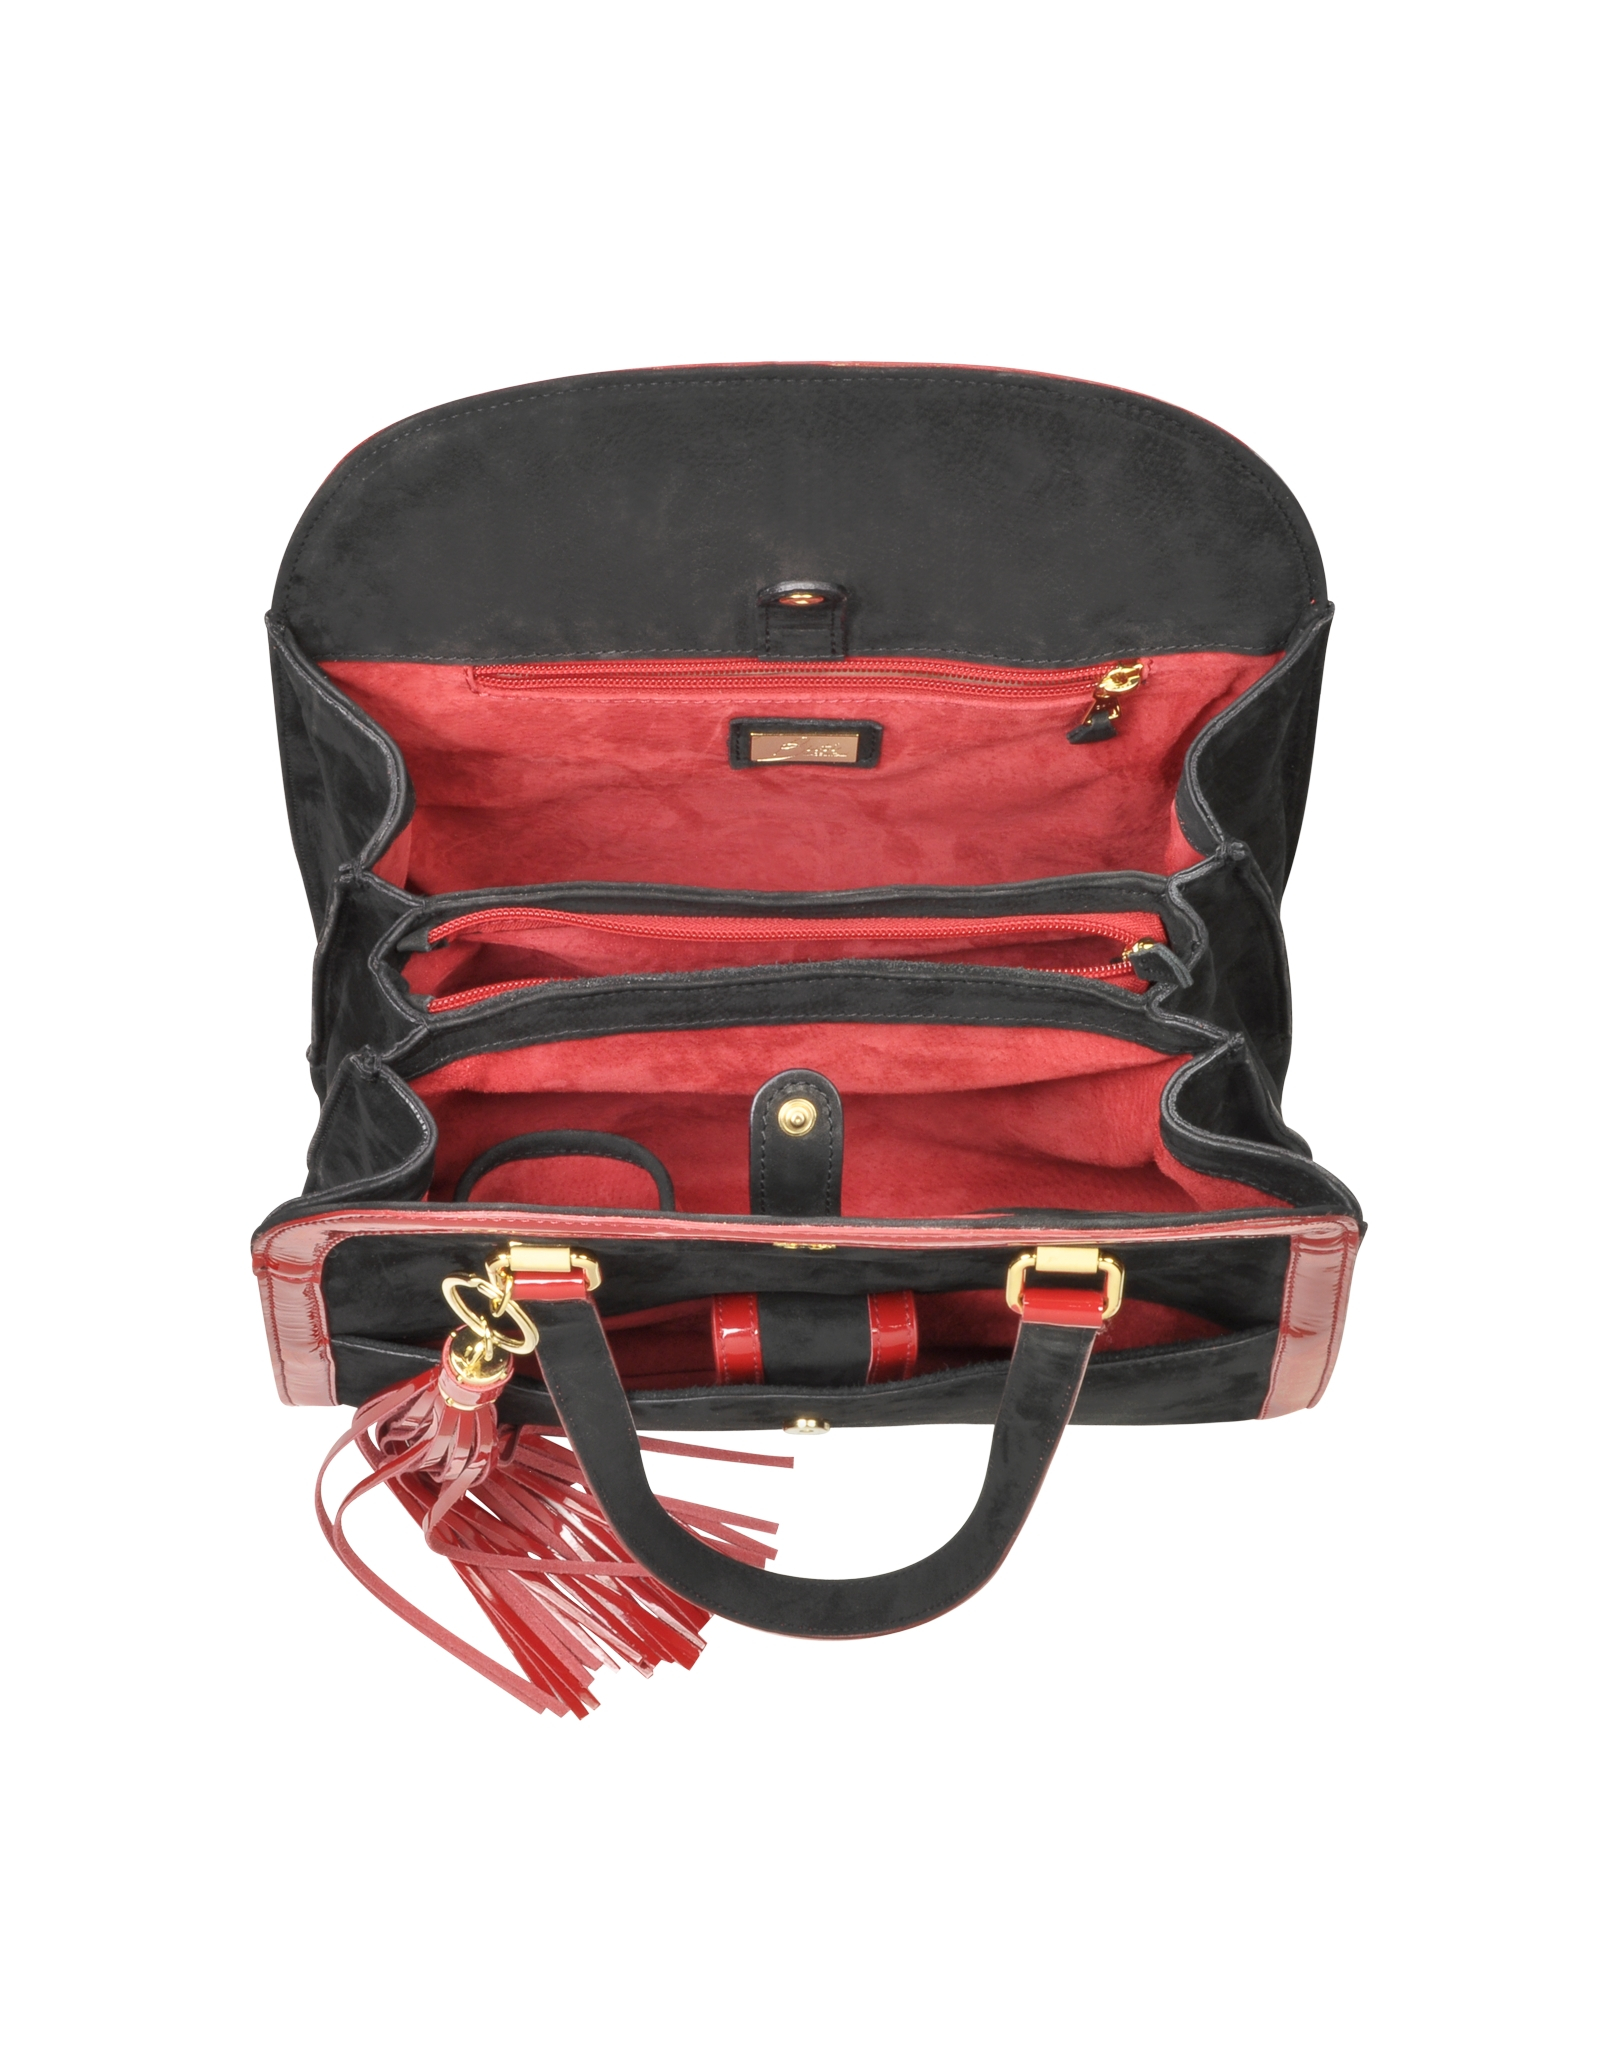 Lyst - Buti Black Suede And Red Patent Leather Shoulder Bag in Black